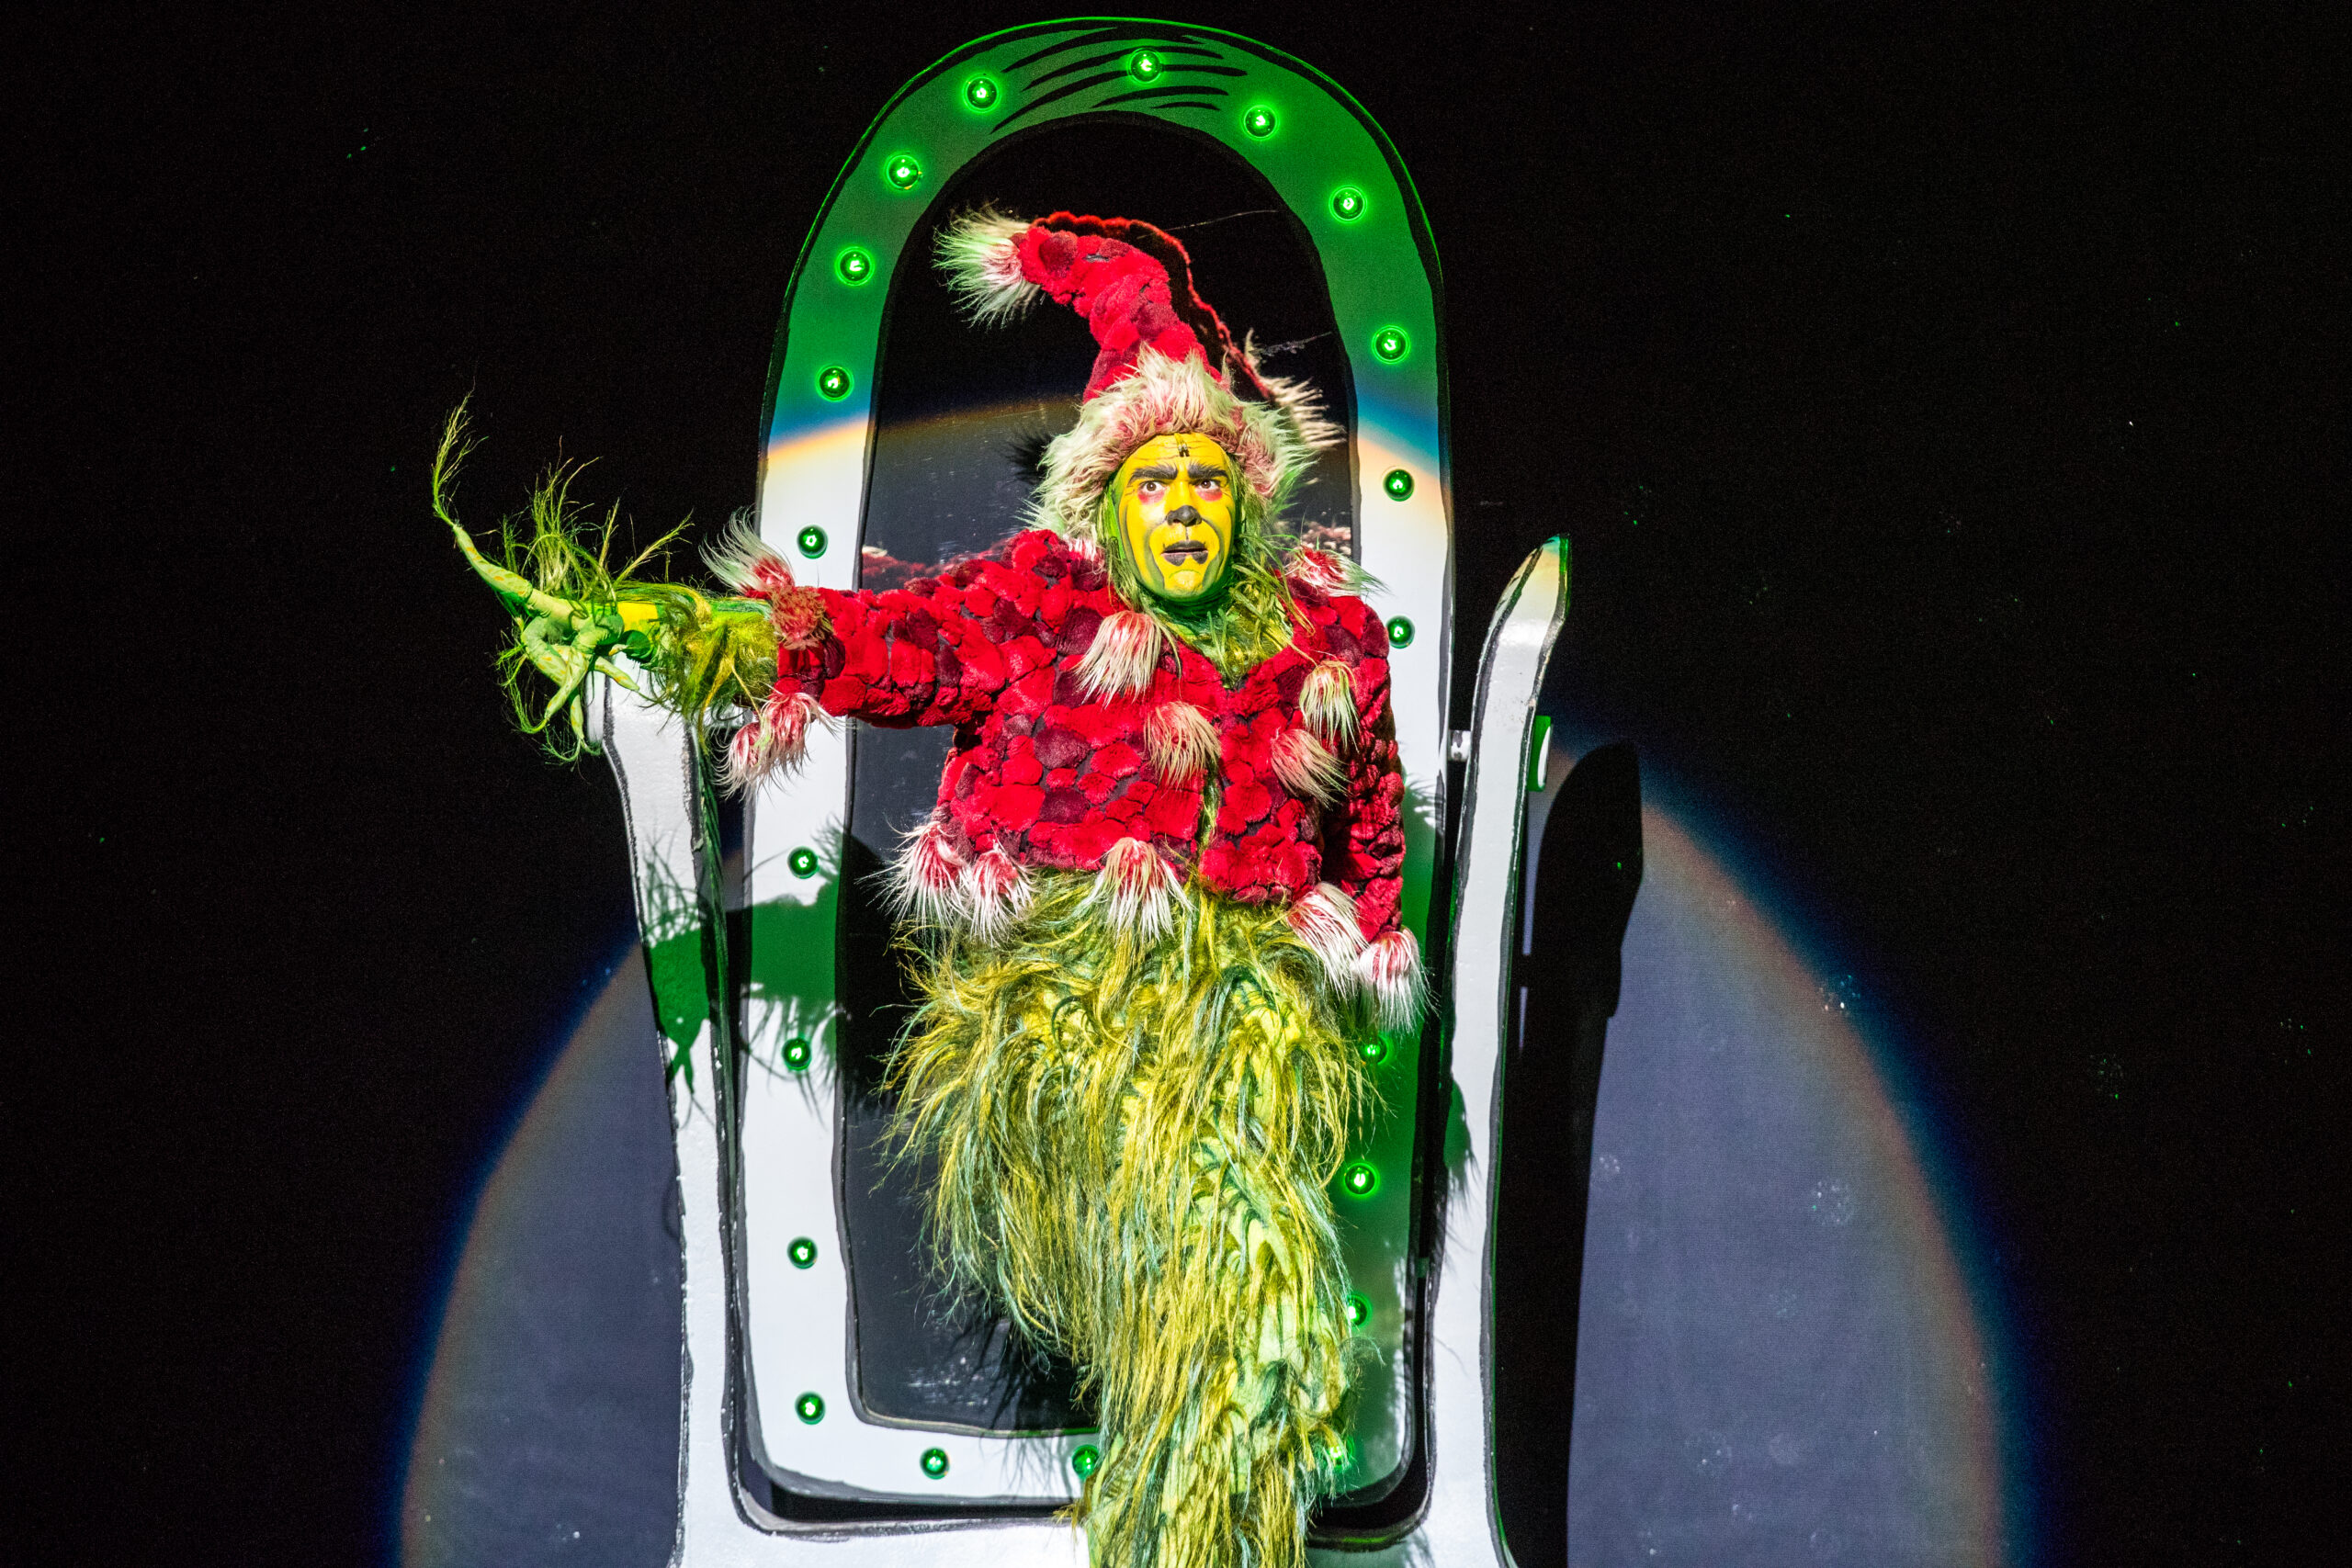 https://neworleanslocal.com/wp-content/uploads/2022/11/14-Philip-Huffman-as-The-Grinch-in-the-2016-Touring-Company-of-Dr.-Seuss-HOW-THE-GRINCH-STOLE-CHRISTMAS-The-Musical-scaled.jpg